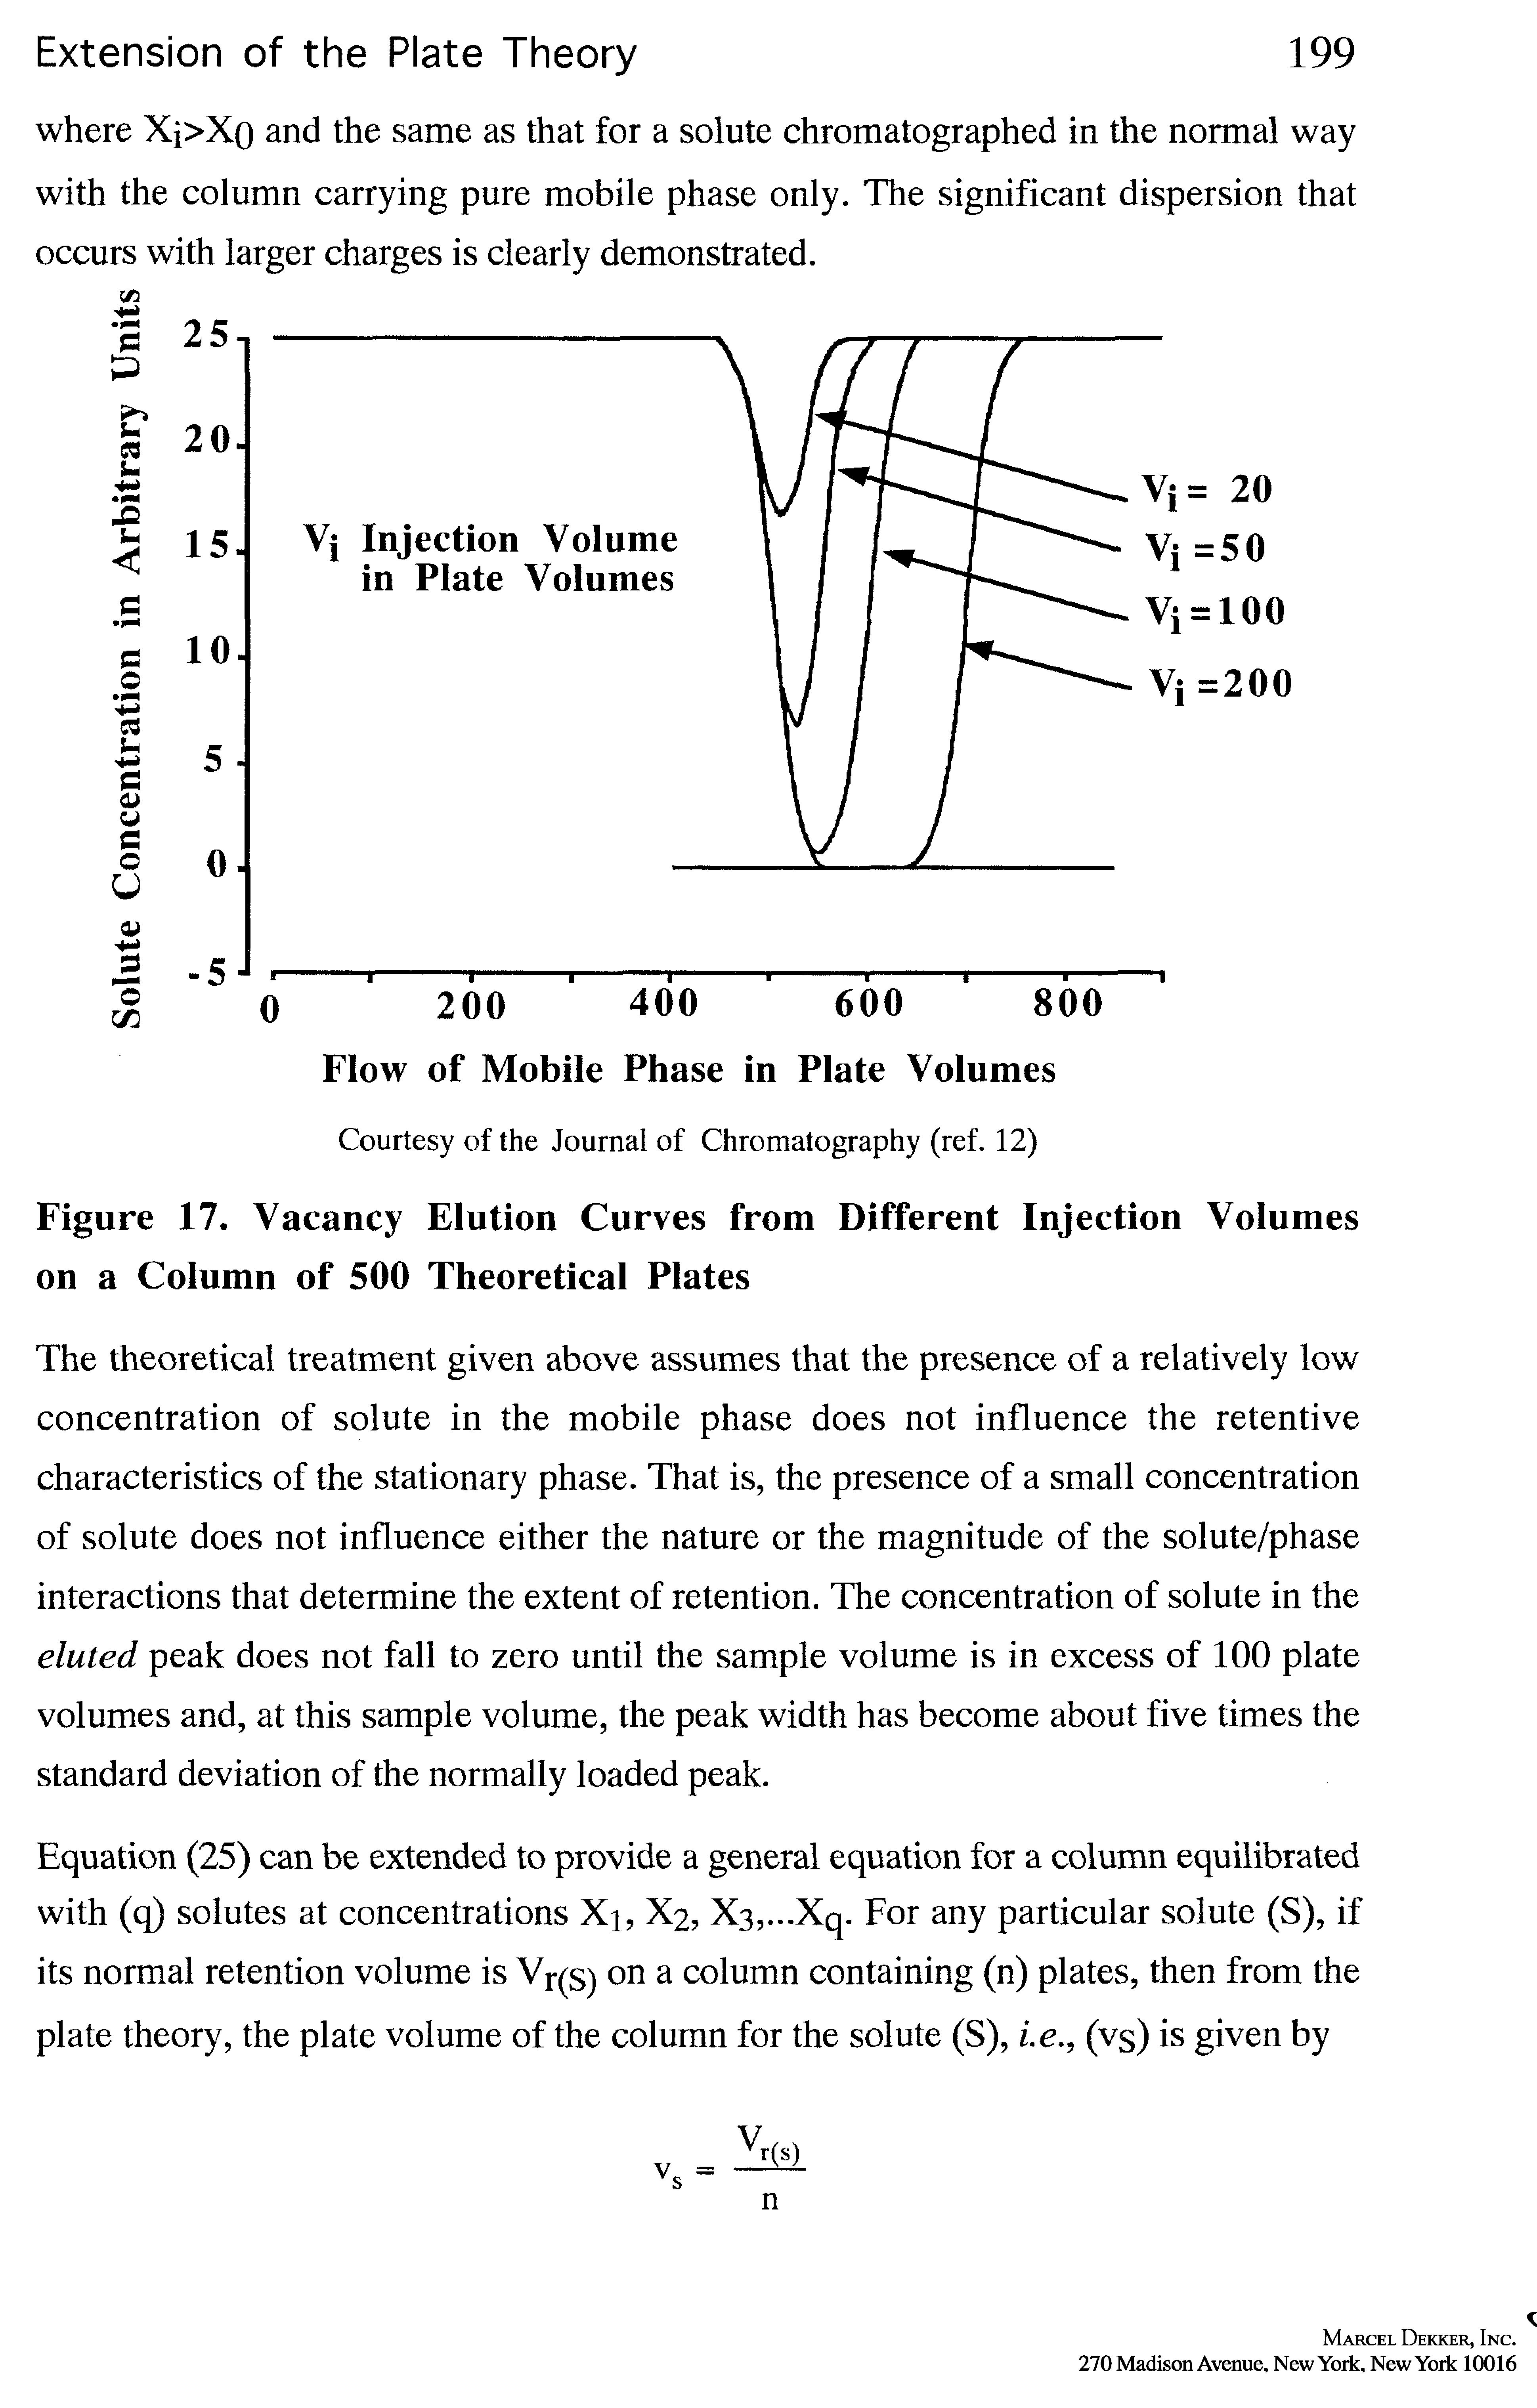 Figure 17. Vacancy Elution Curves from Different Injection Volumes on a Column of 500 Theoretical Plates...